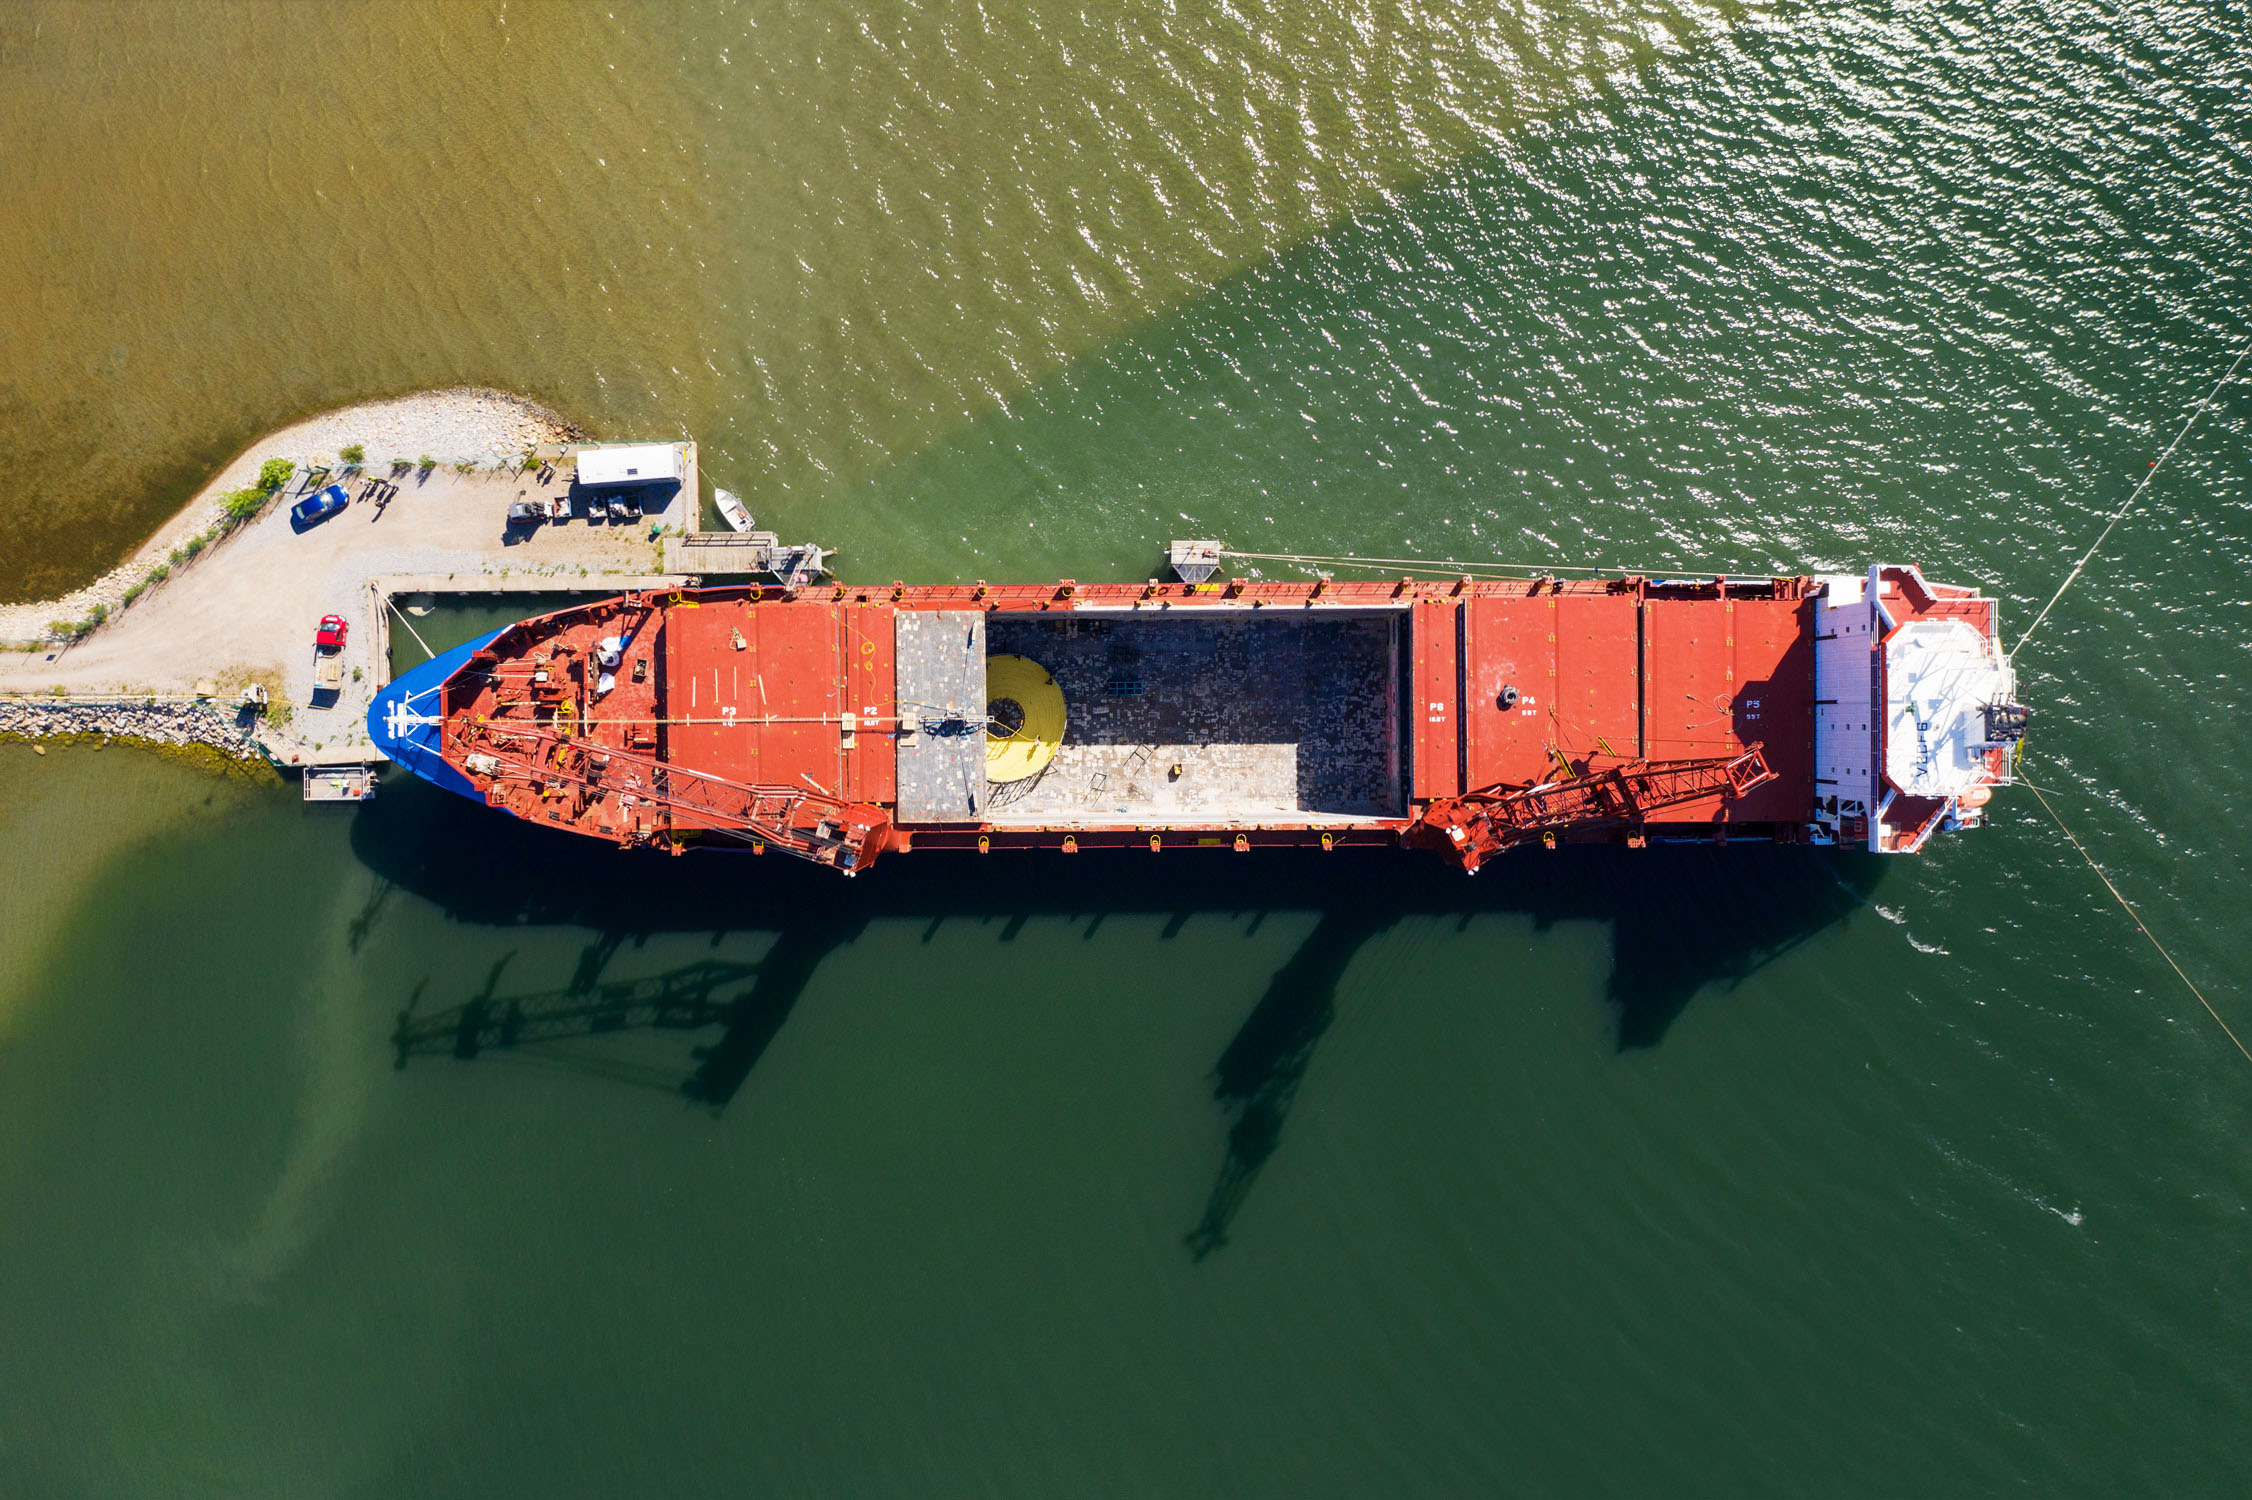 Aerial view of a large red cable vessel docked at a pier. The water surrounding the ship is greenish in color, indicating it might be in a harbor.